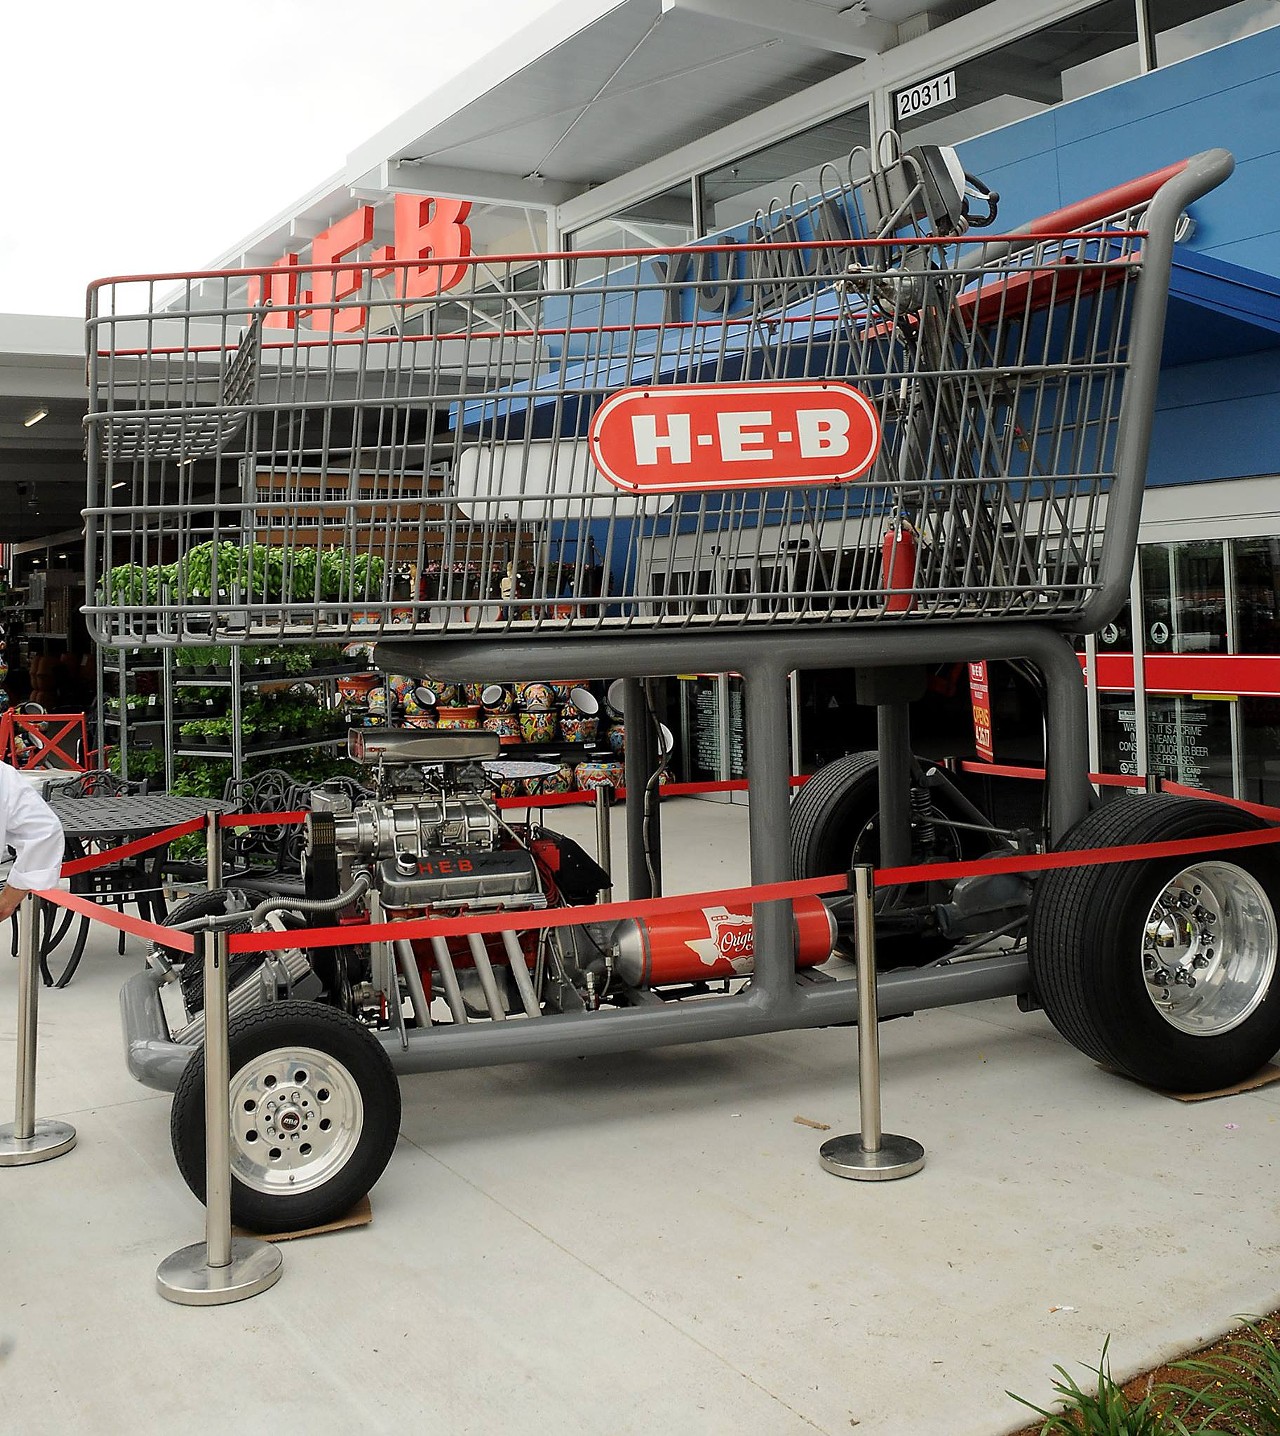 That giant shopping cart has an interesting backstory.
Anyone who’s been to a parade or community event where H-E-B has participated has likely seen a giant shopping cart from the store. But did you know that the oversized cart was actually designed by an H-E-B employee? In 2011, longtime employee Carroll Wesch came up with the concept, and the freakishly large cart has been making appearances ever since.
Photo via Facebook / H-E-B